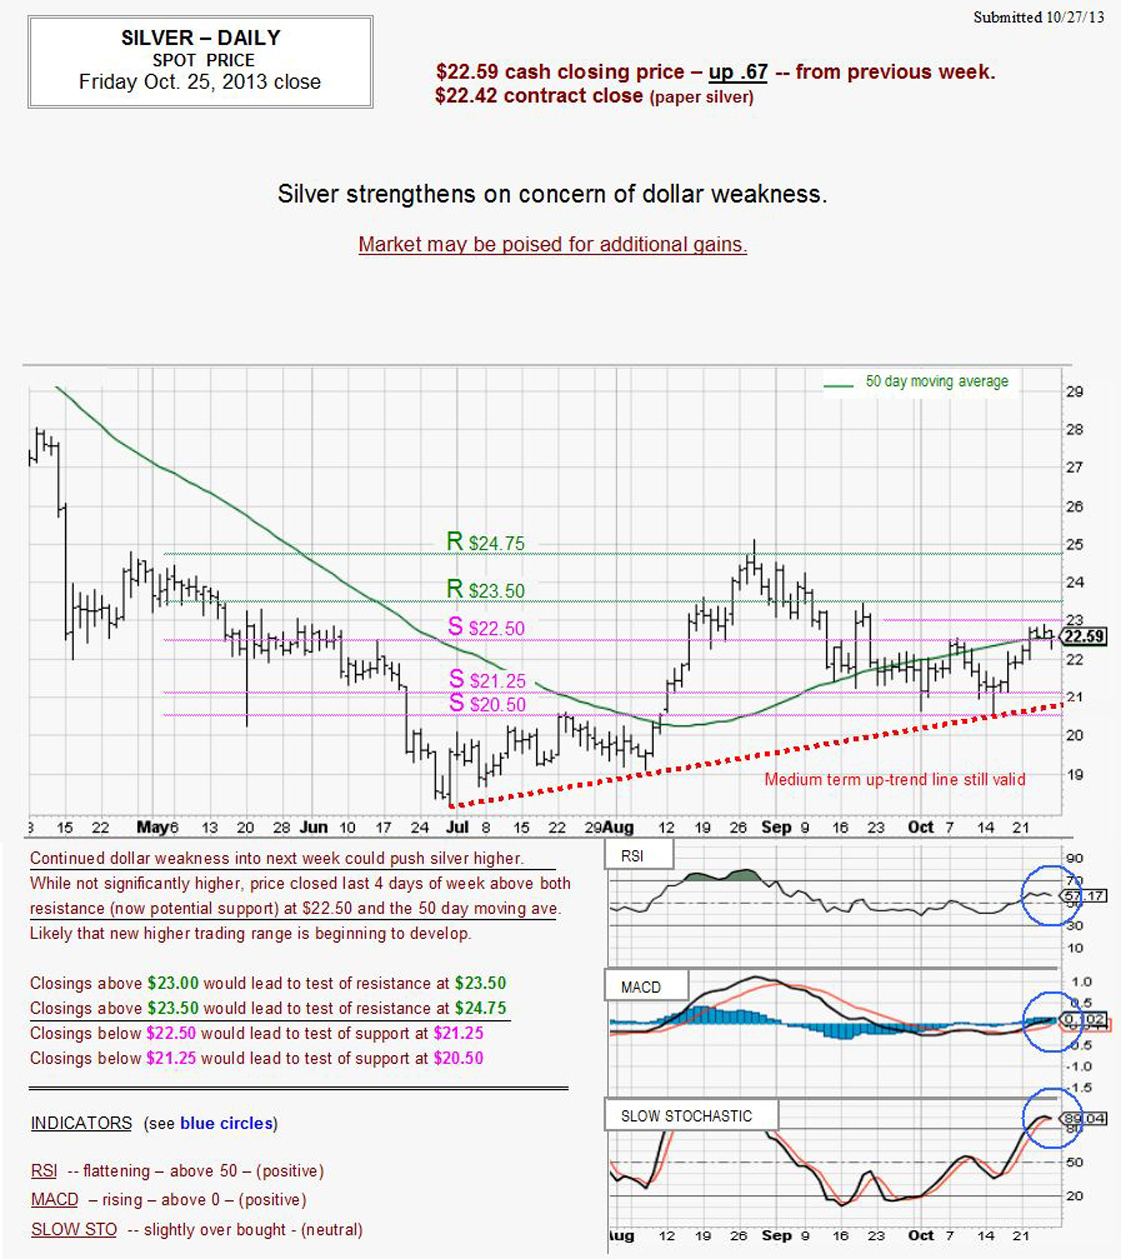 Oct 25, 2013 chart & commentary